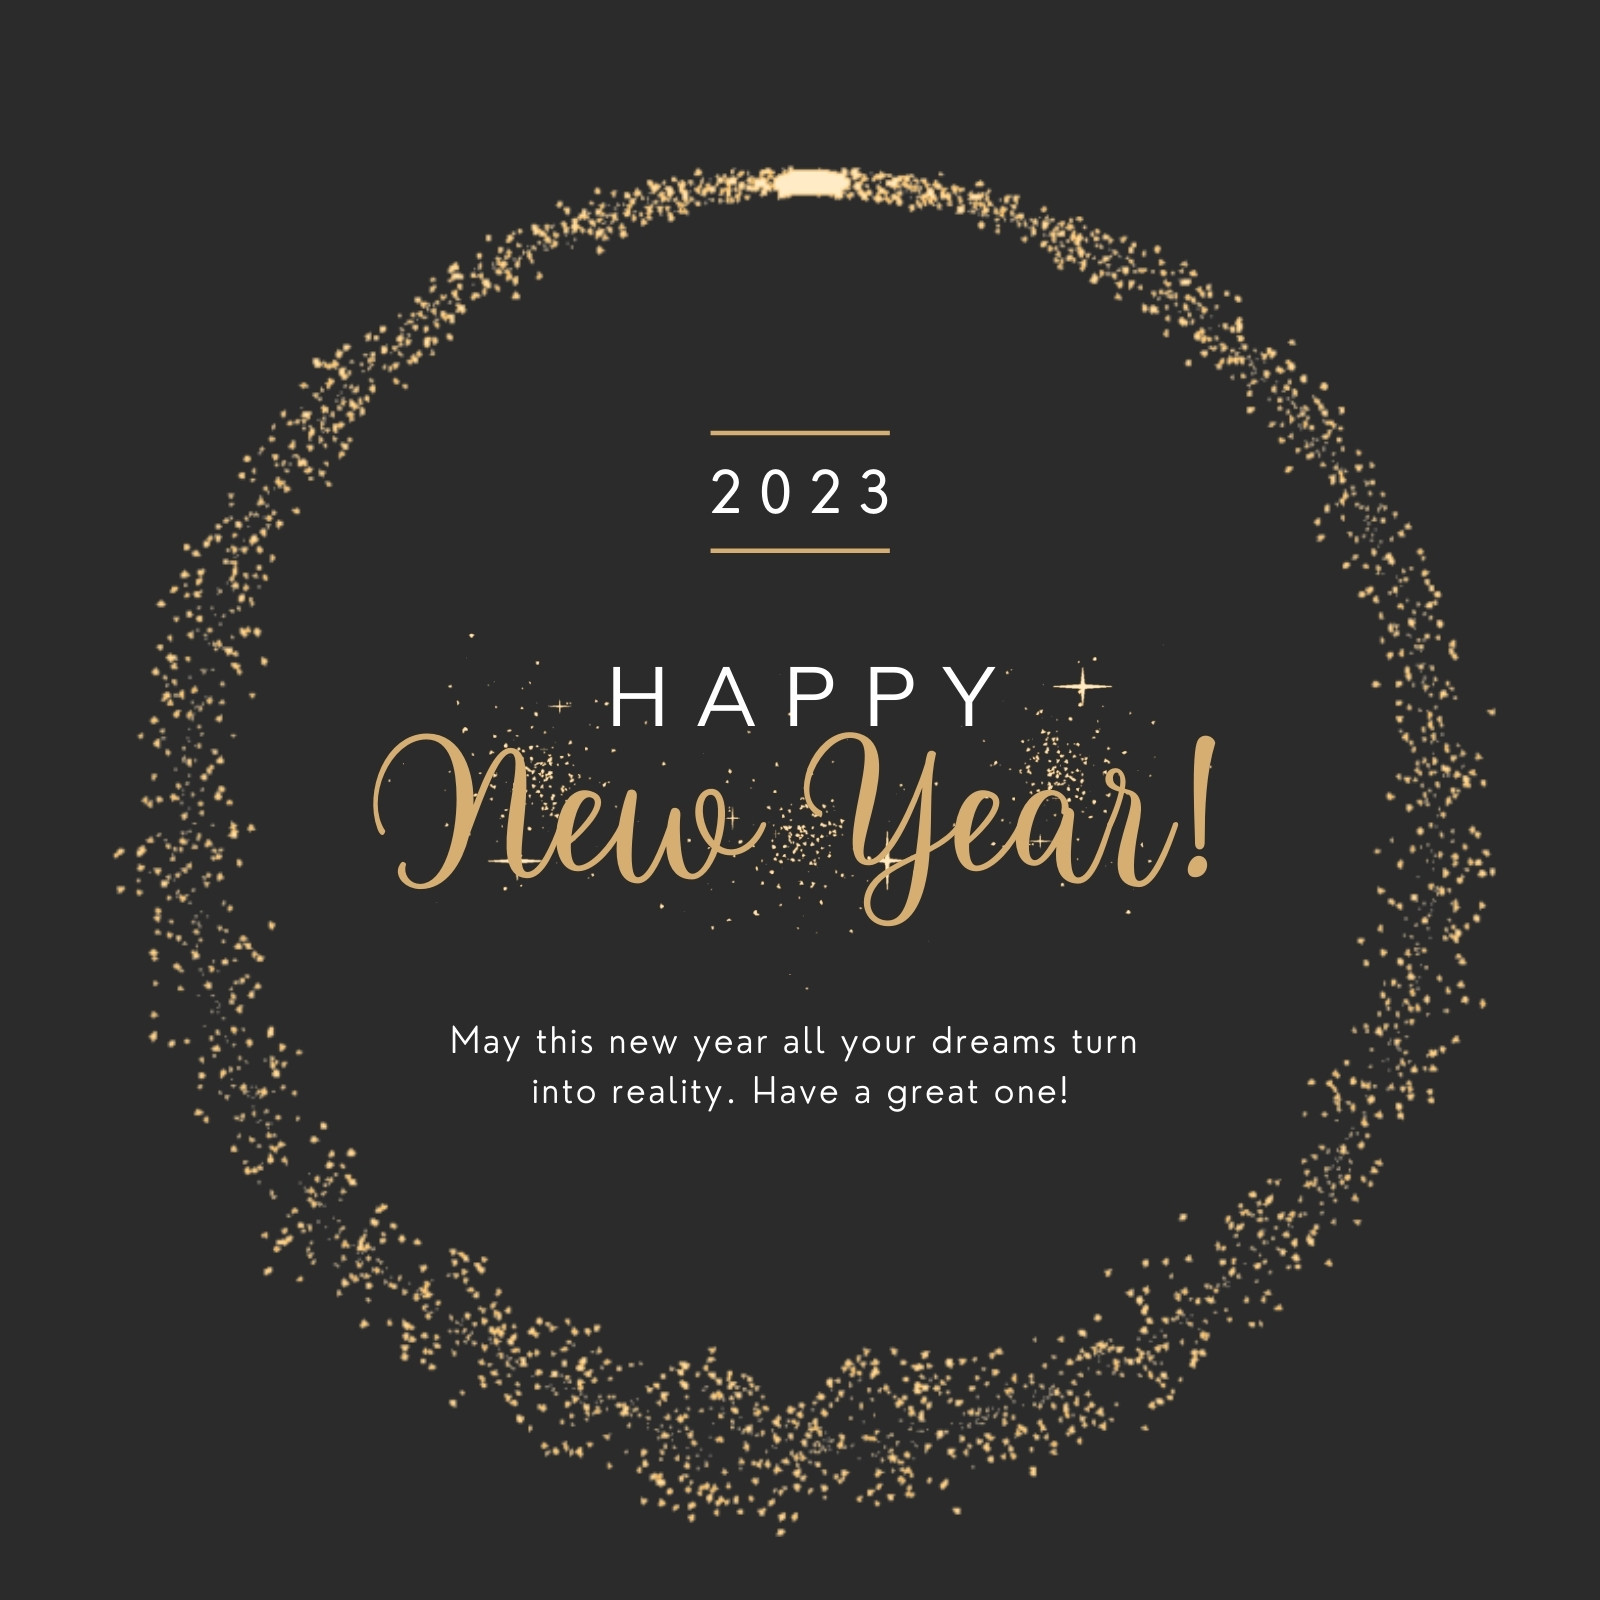 Free and customizable new year templates